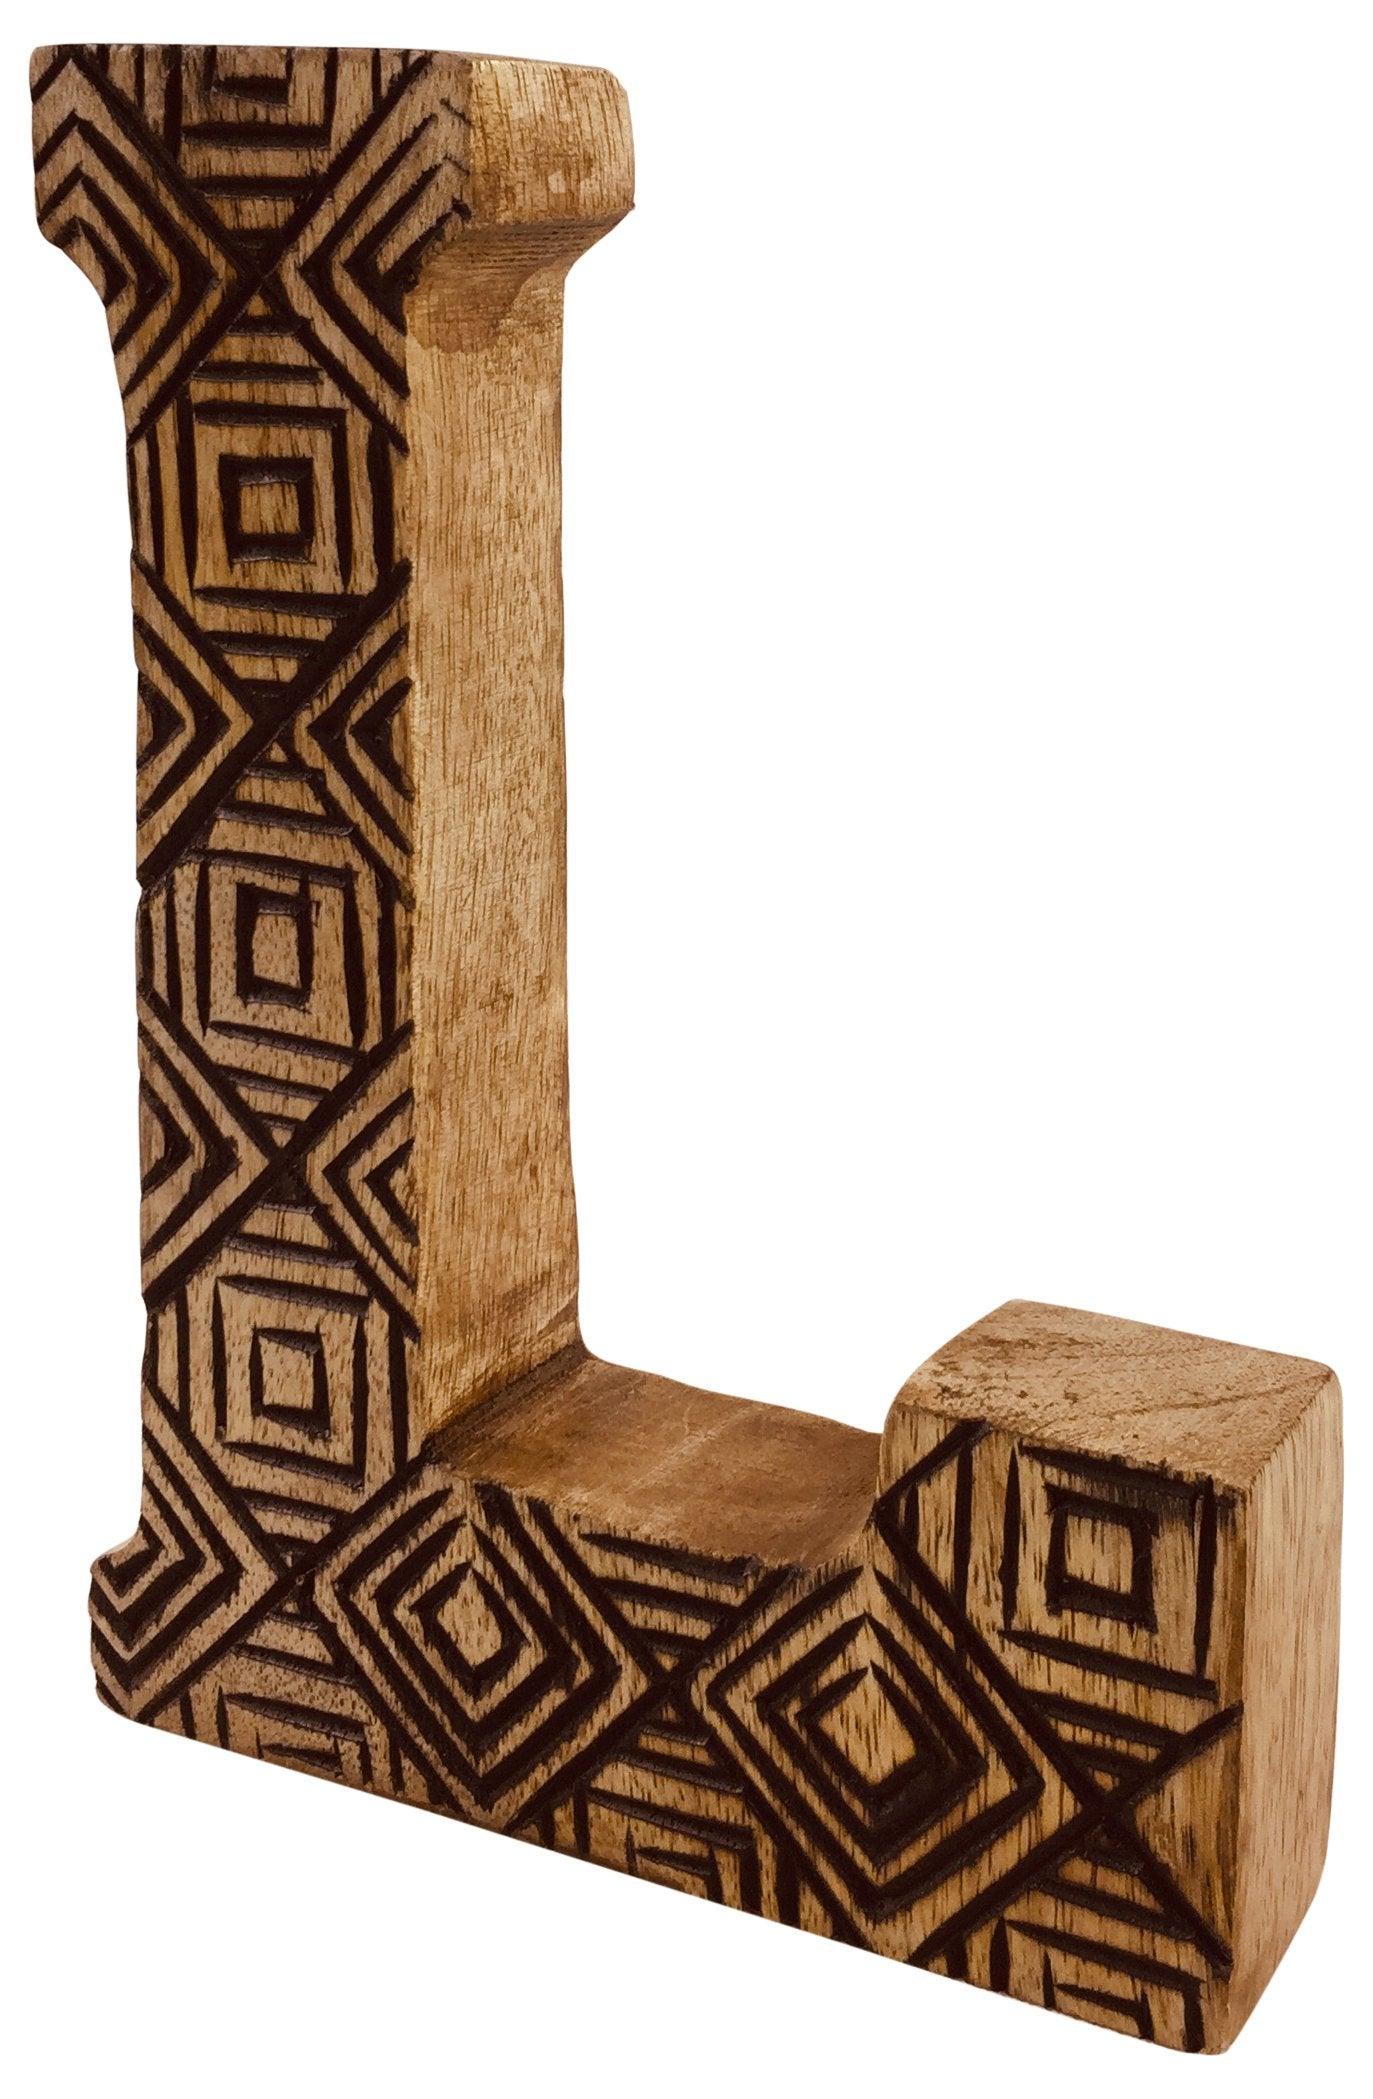 View Hand Carved Wooden Geometric Letter L information